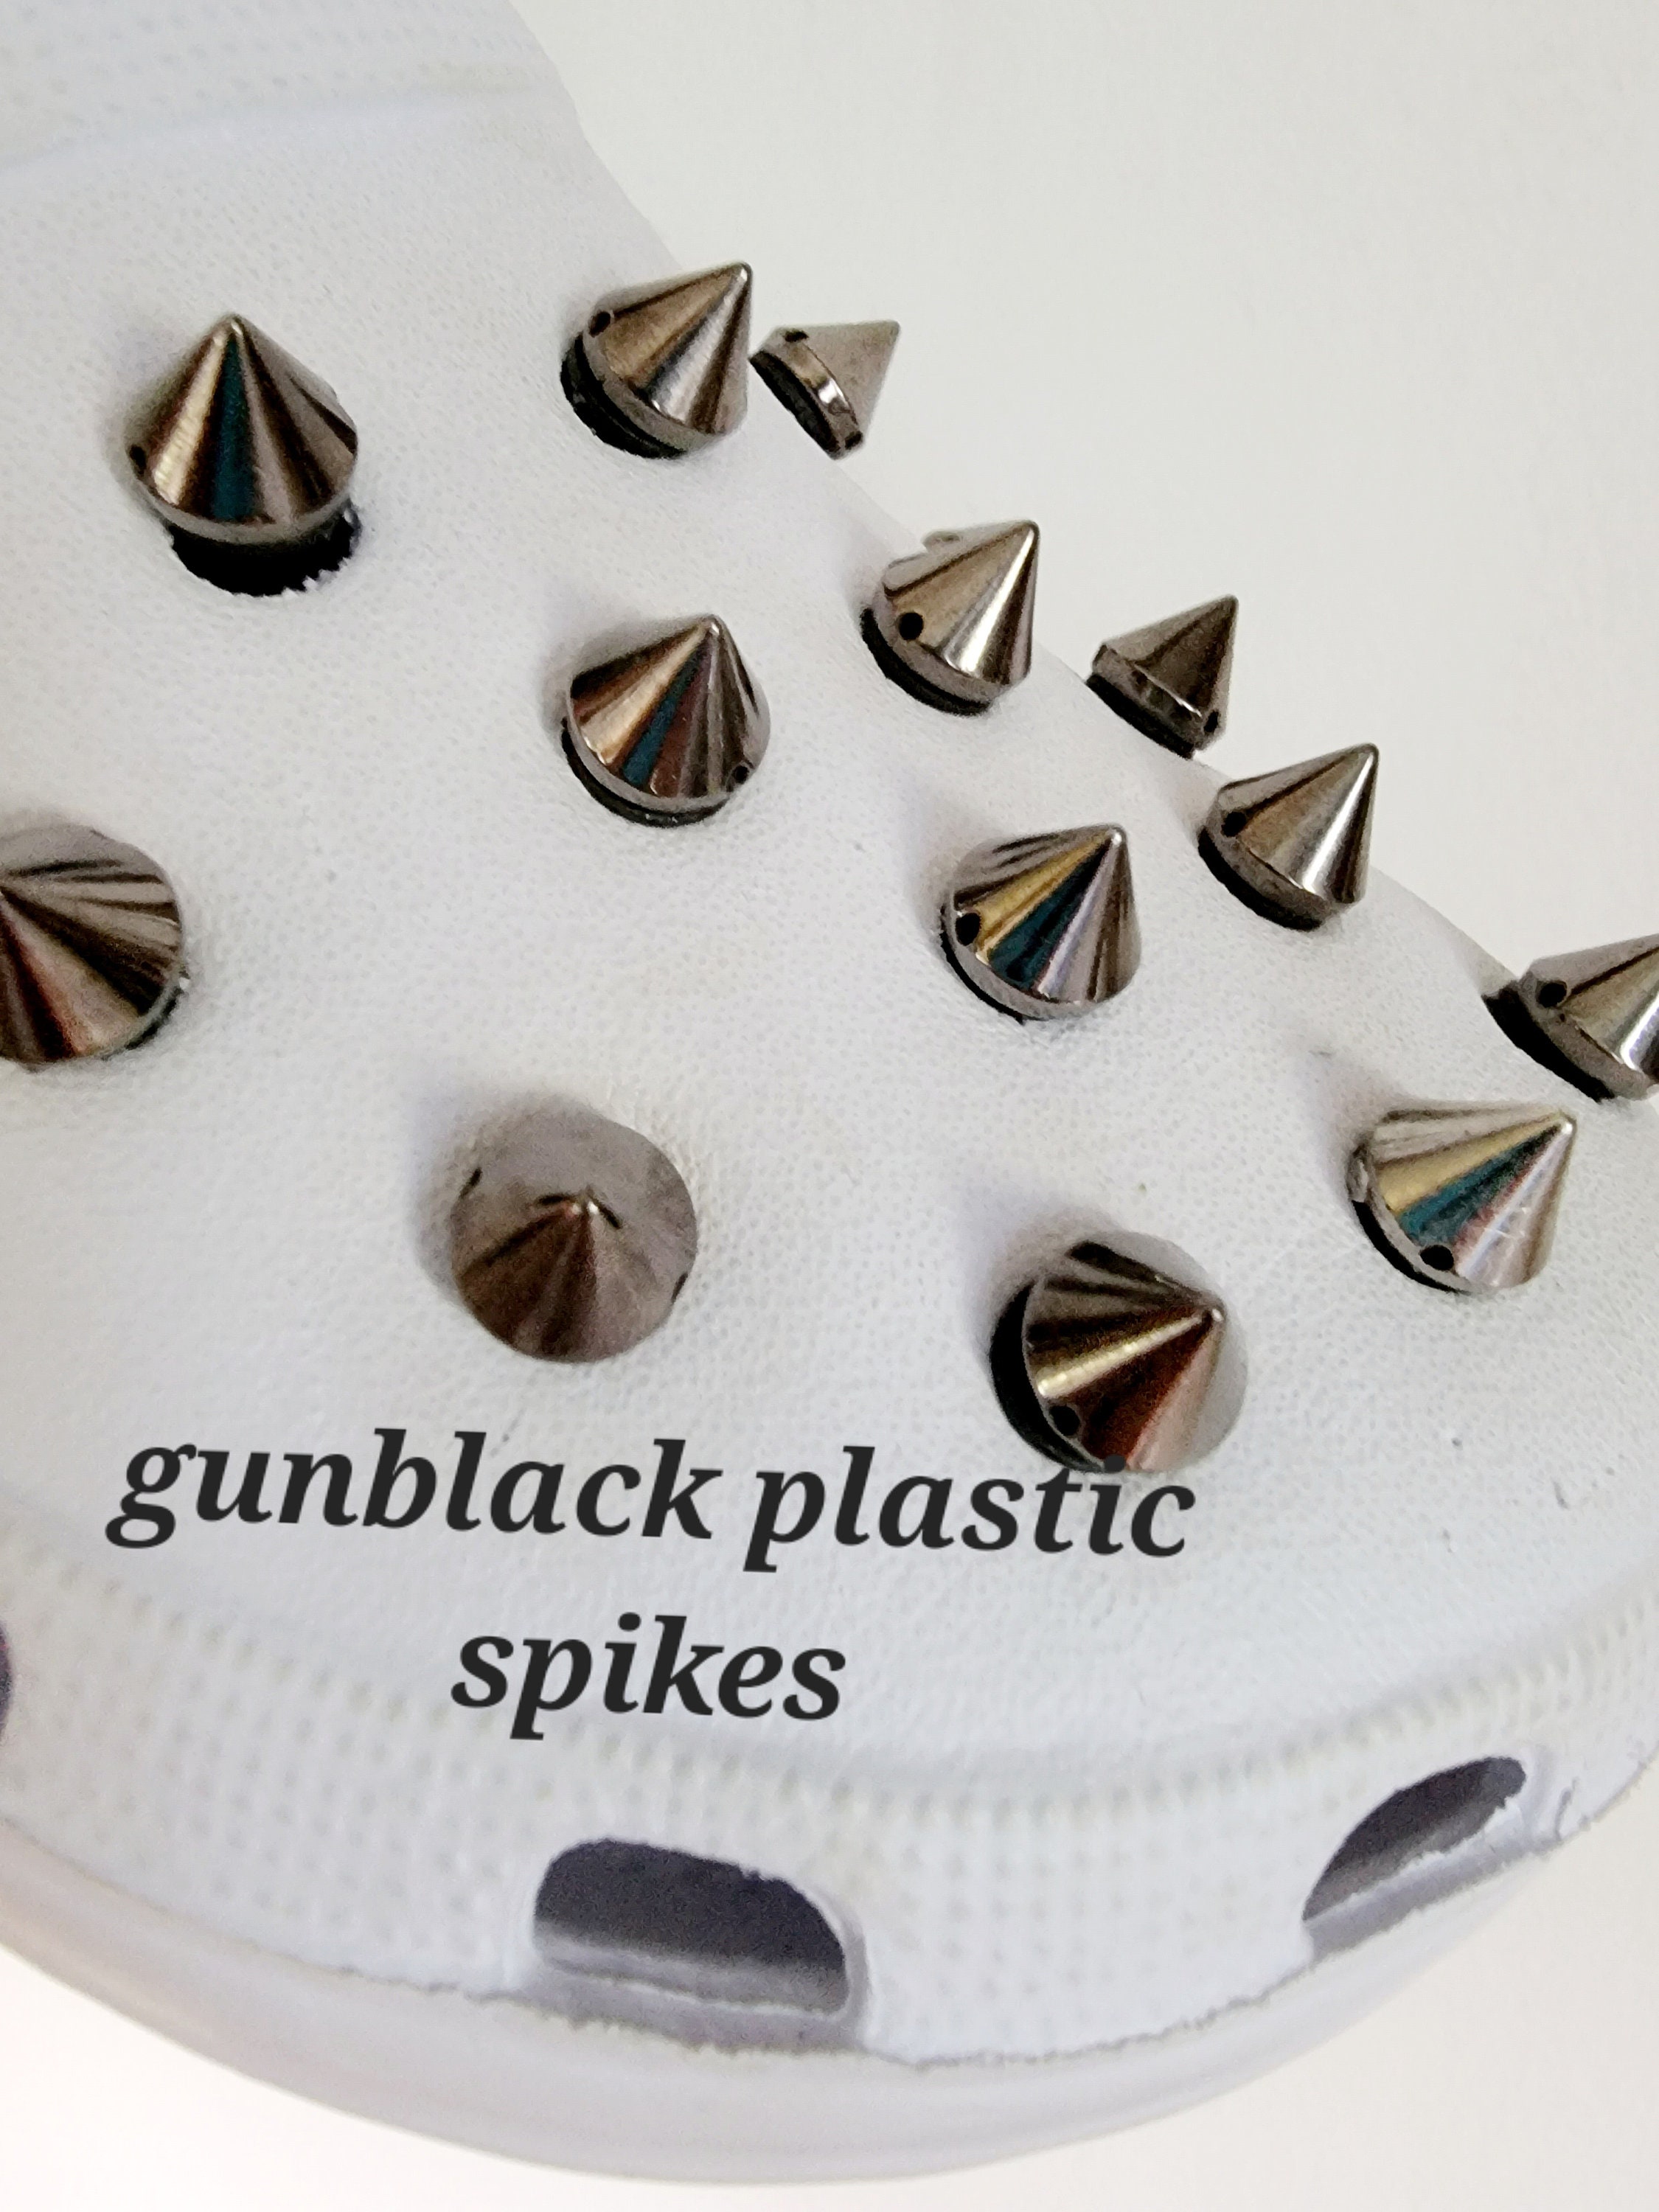 Ultimate Big Shoes Spikes, 10 Spike Shoes Charm Set, Spikes Shoes Charms, Gothic Shoe Charms, Spike Shoe Charm, Plastic Cone Spikes